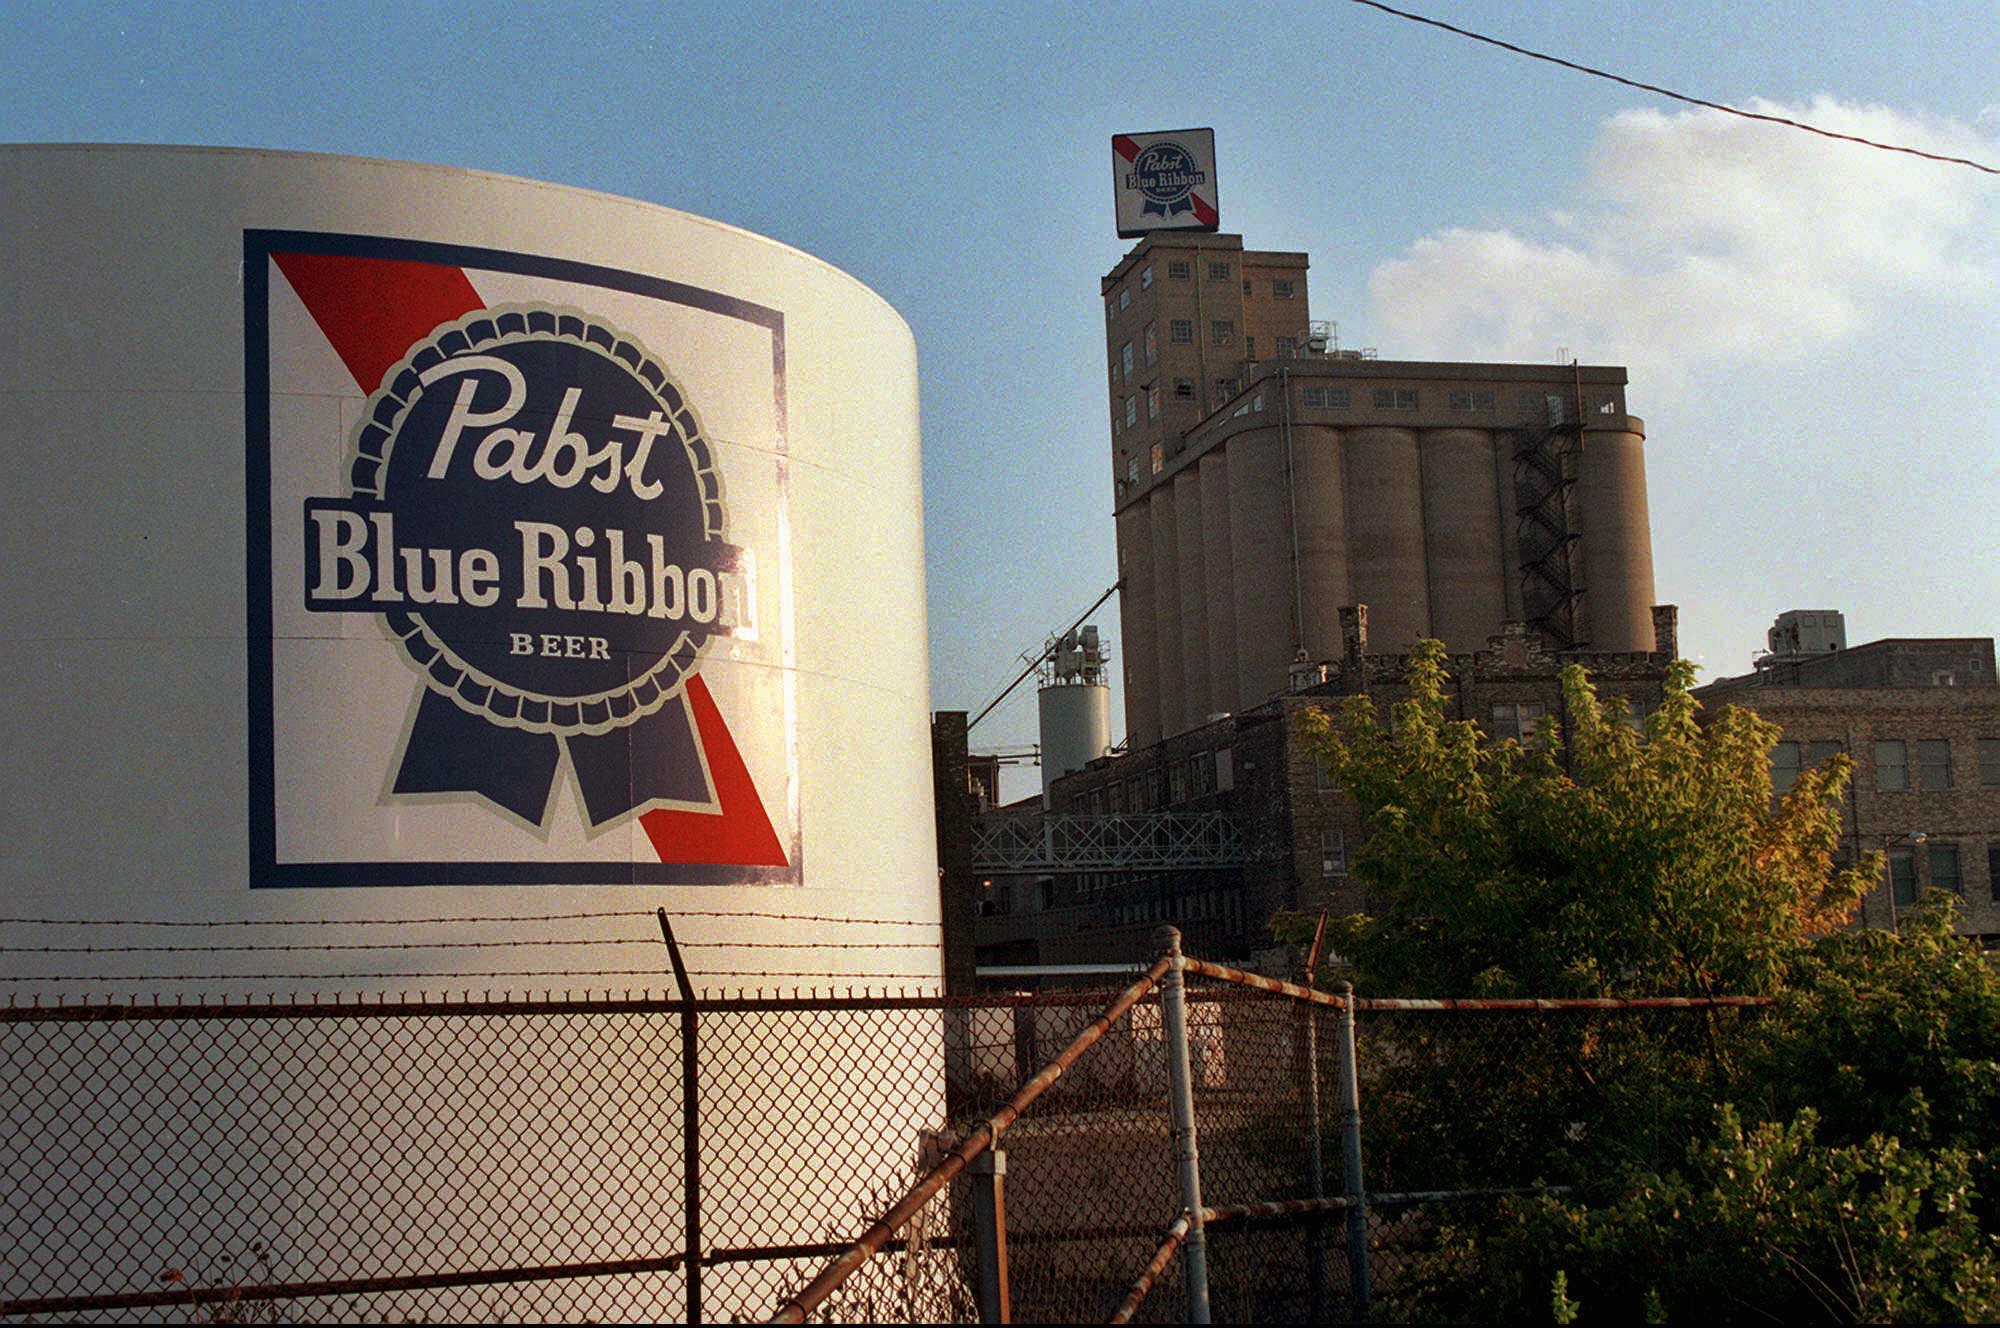 Pabst brewery in Milwaukee